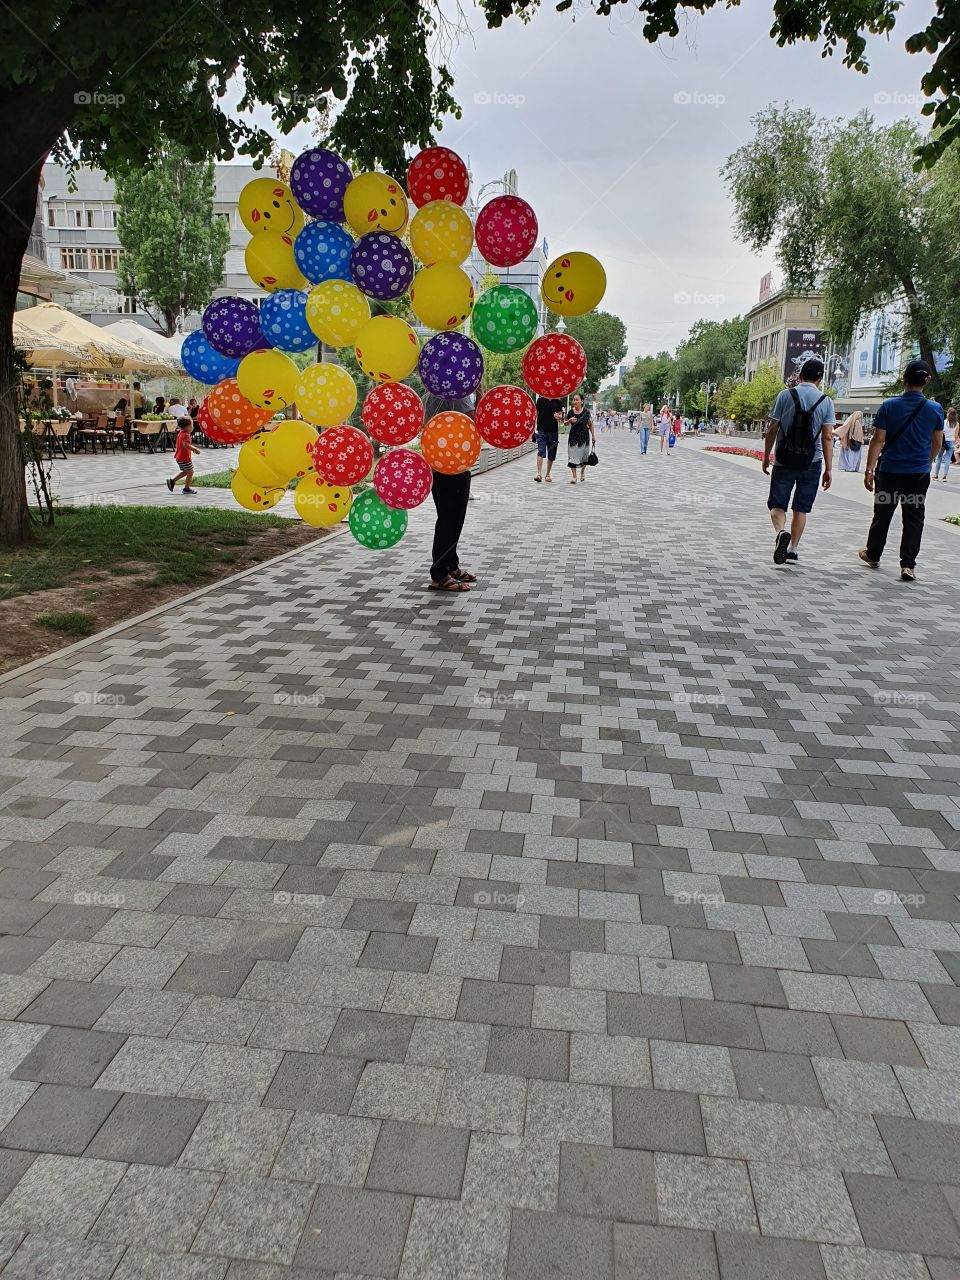 man selling baloons on the street